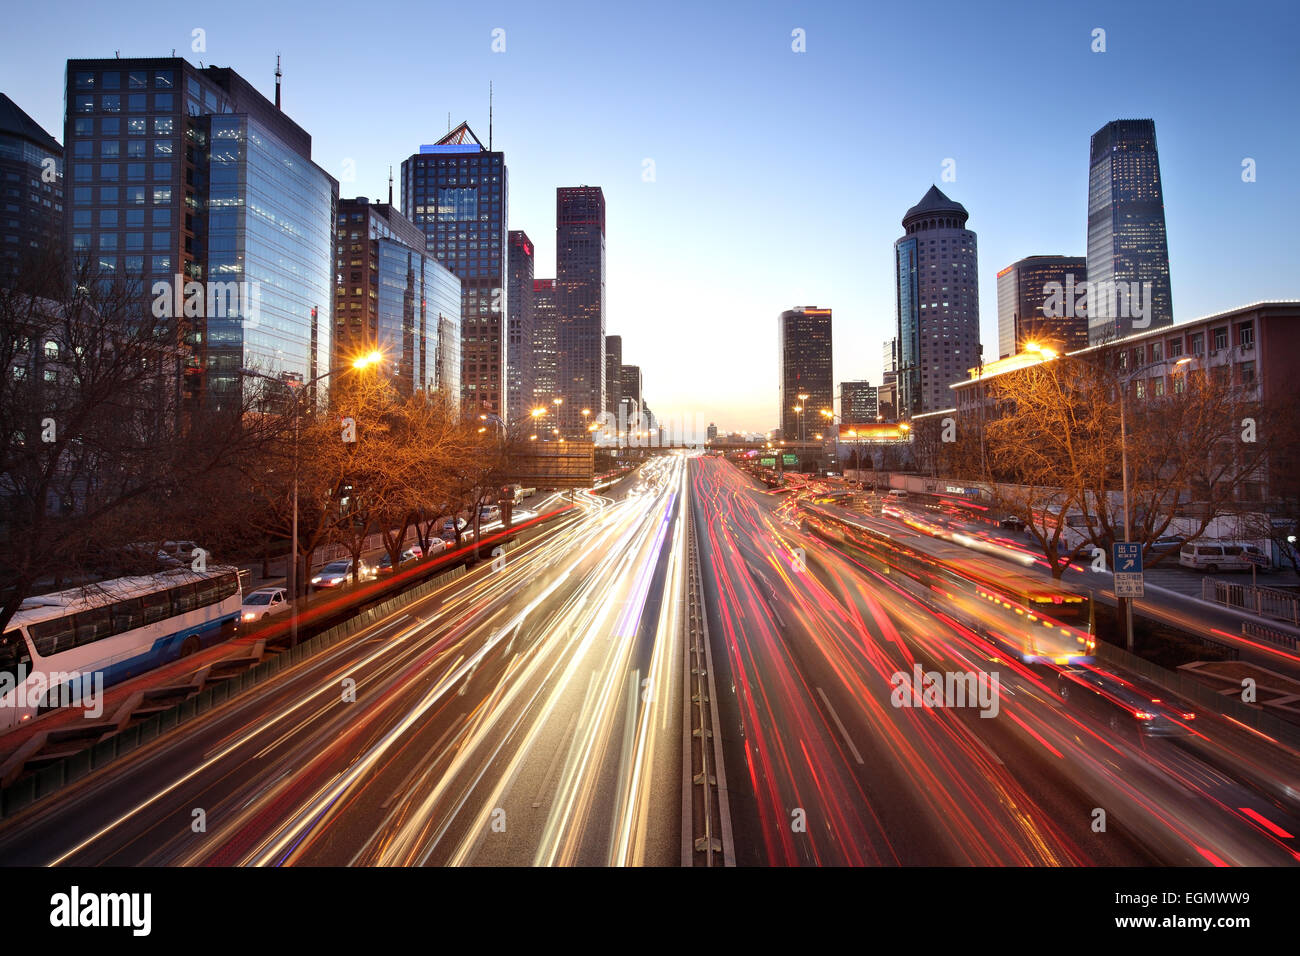 Beijing skyline at the central business district. Stock Photo